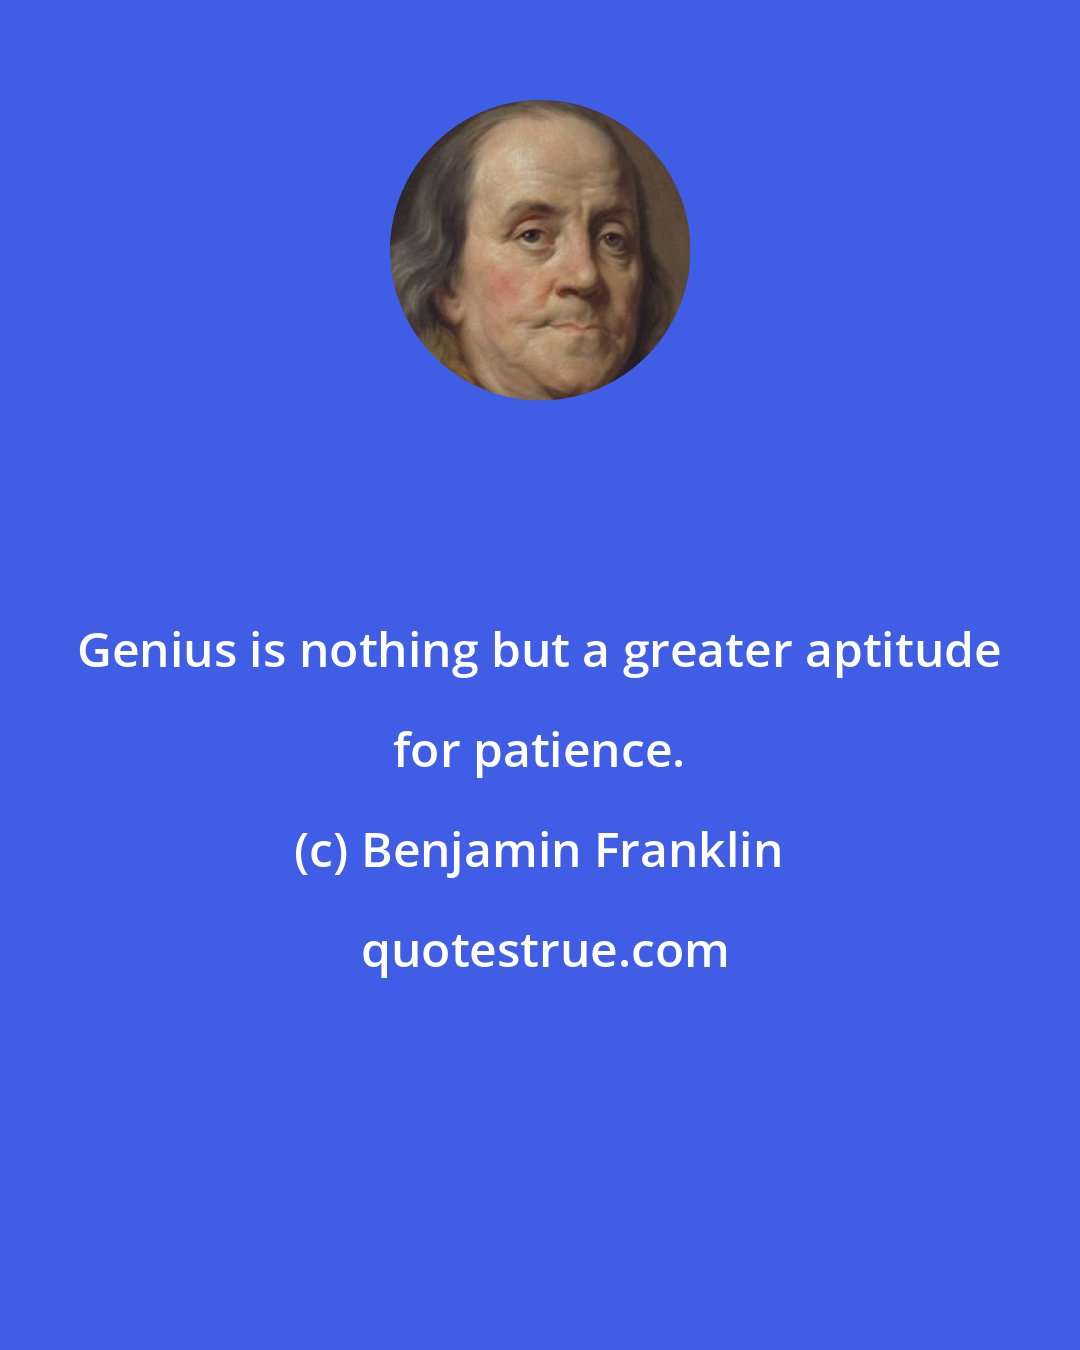 Benjamin Franklin: Genius is nothing but a greater aptitude for patience.